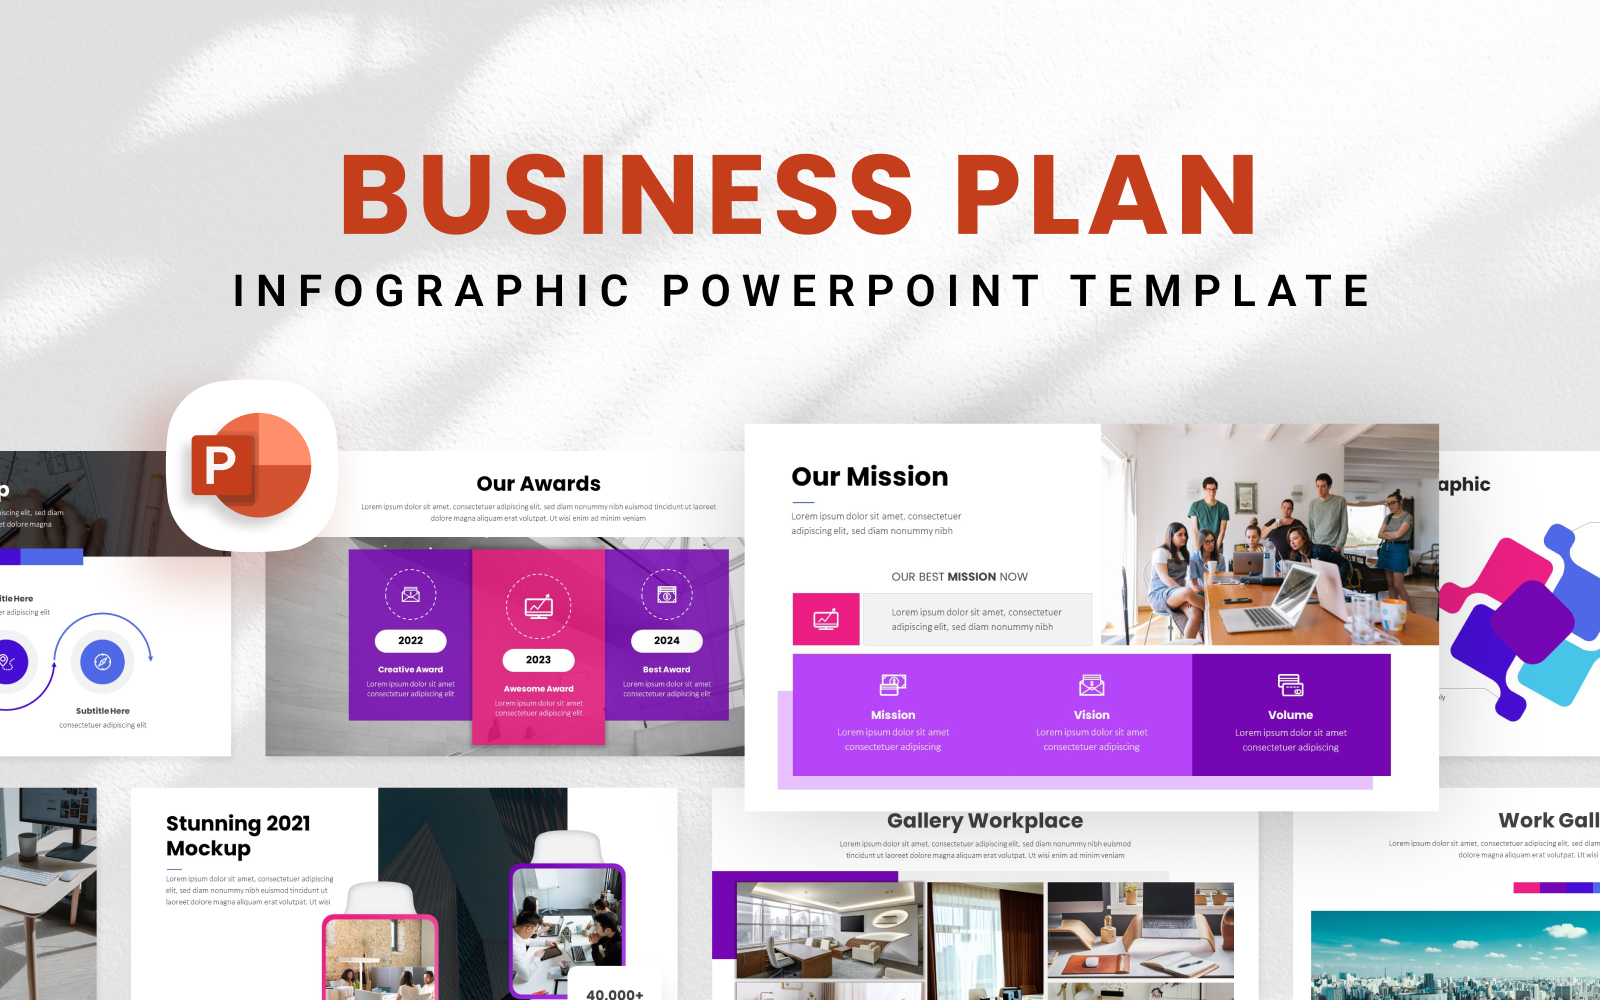 Business Plan Infographic Presentation Template